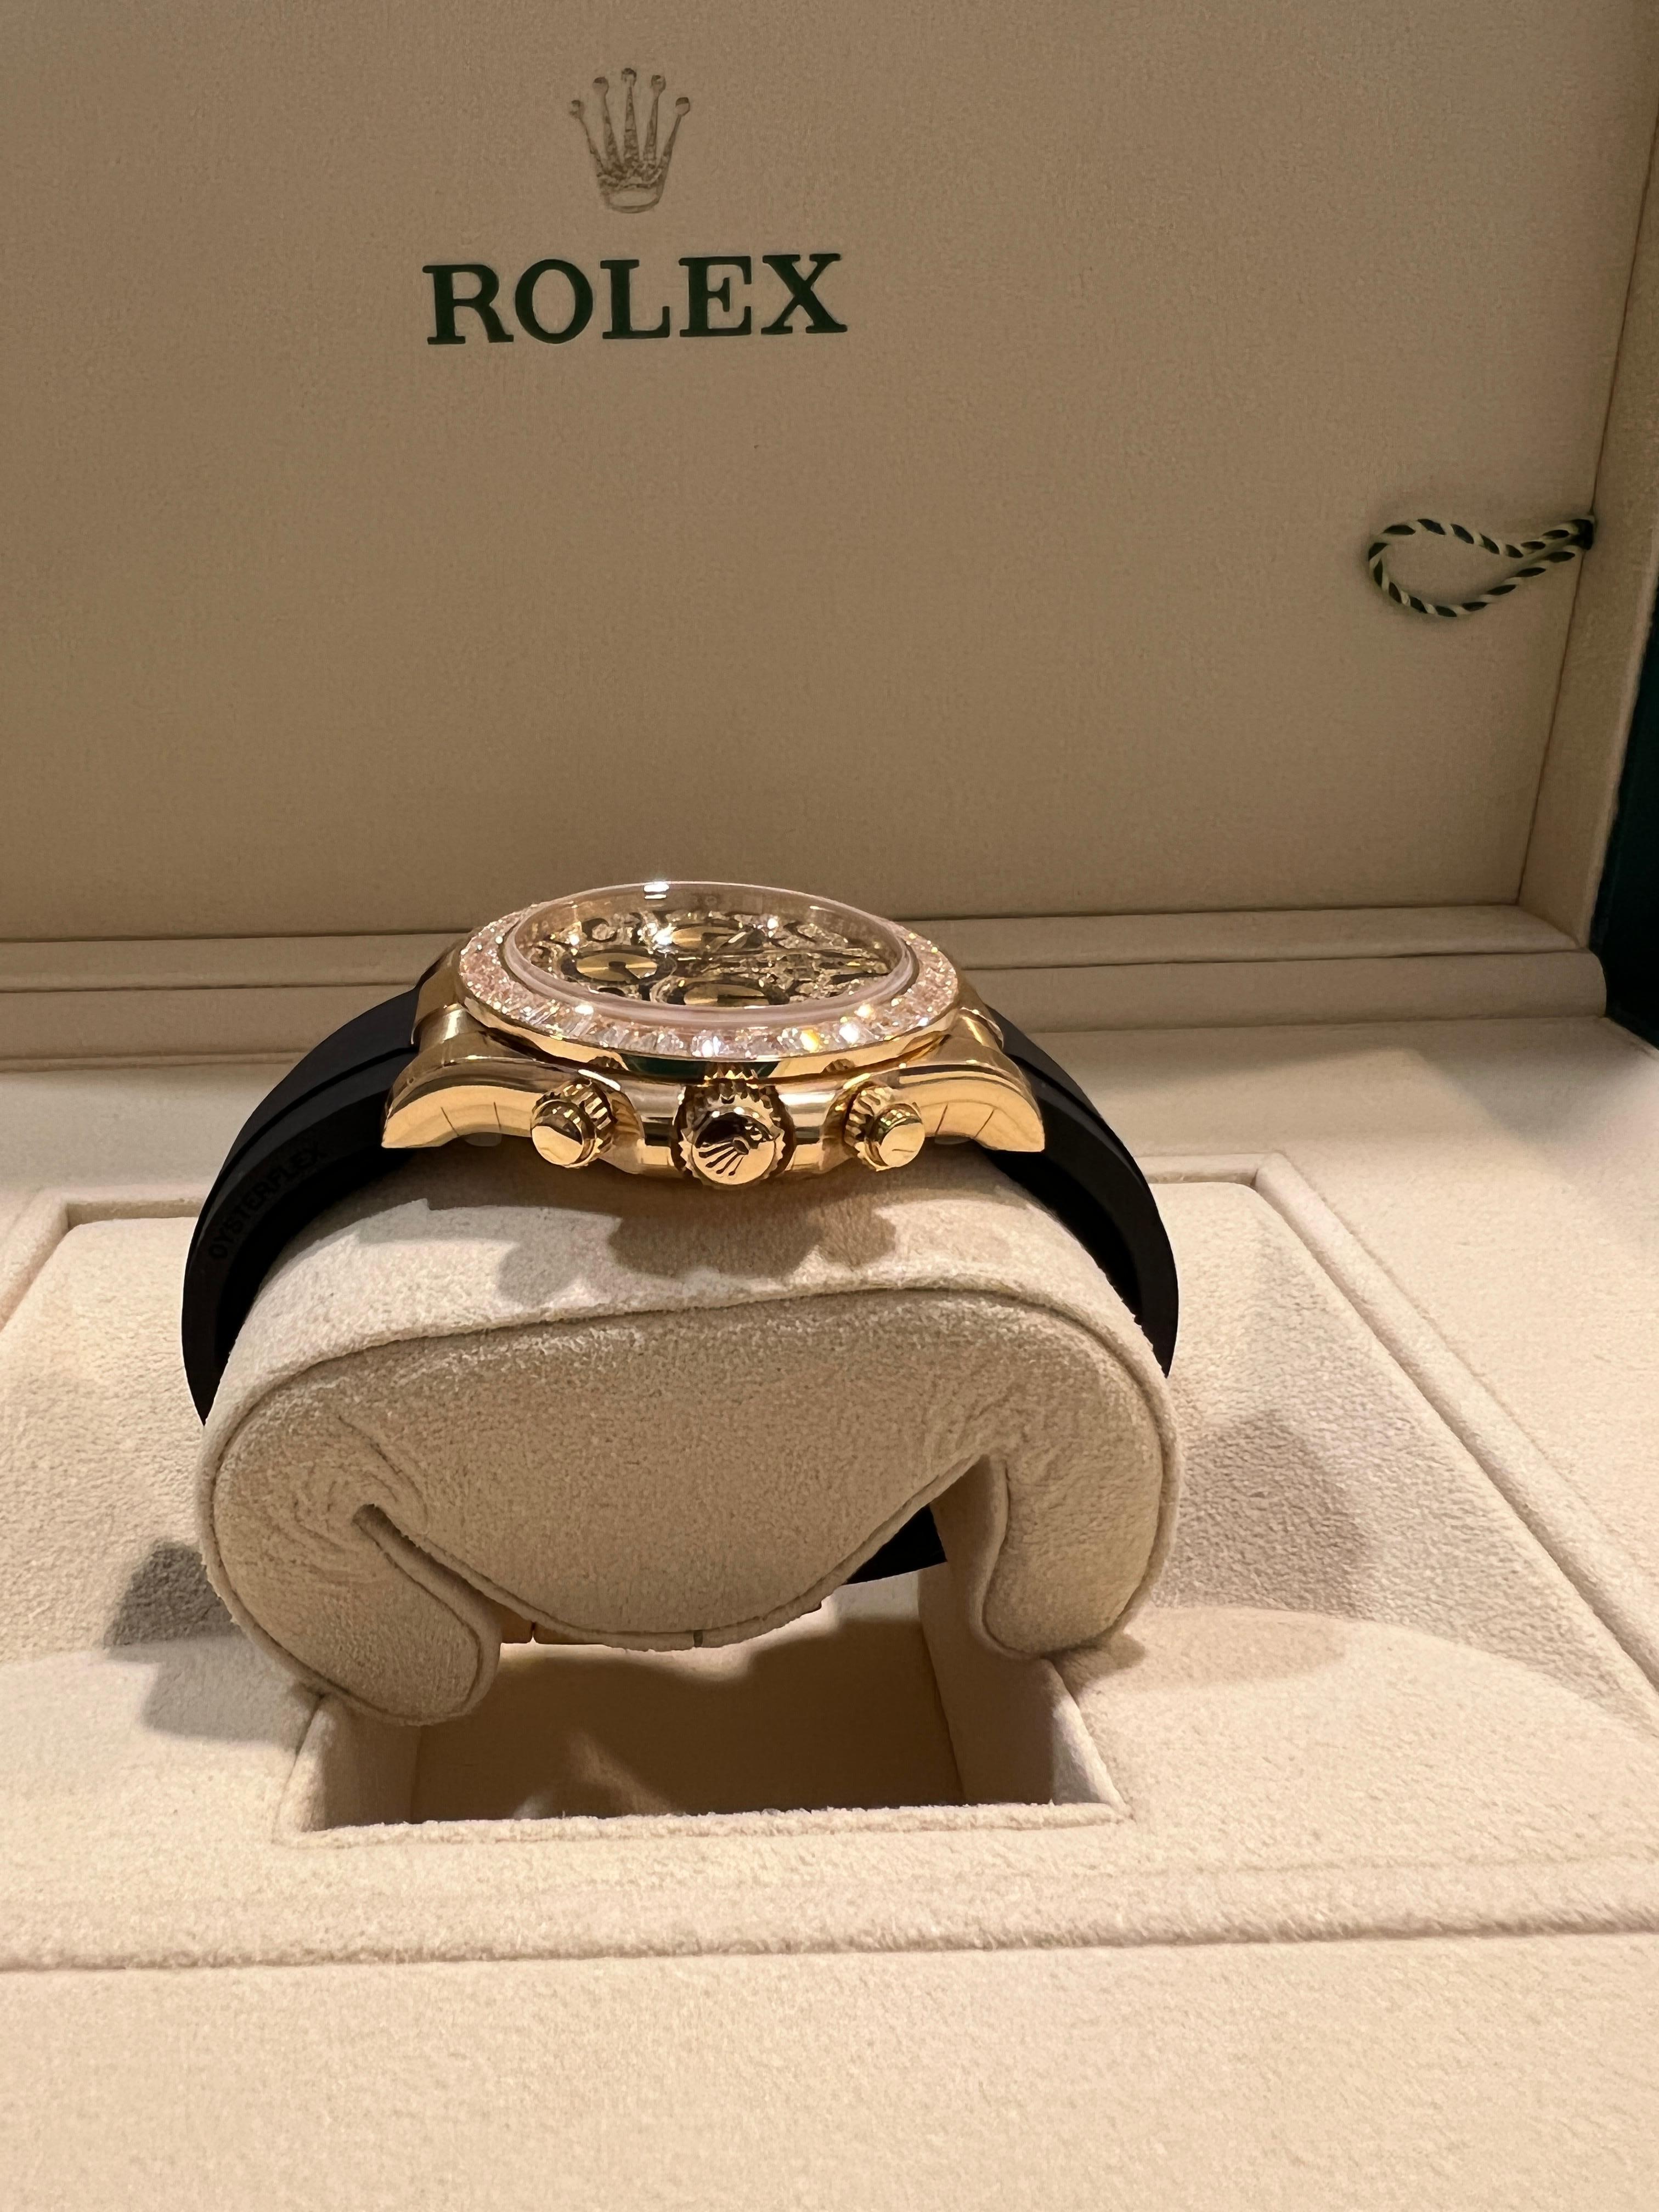 rolex eye of the tiger for sale